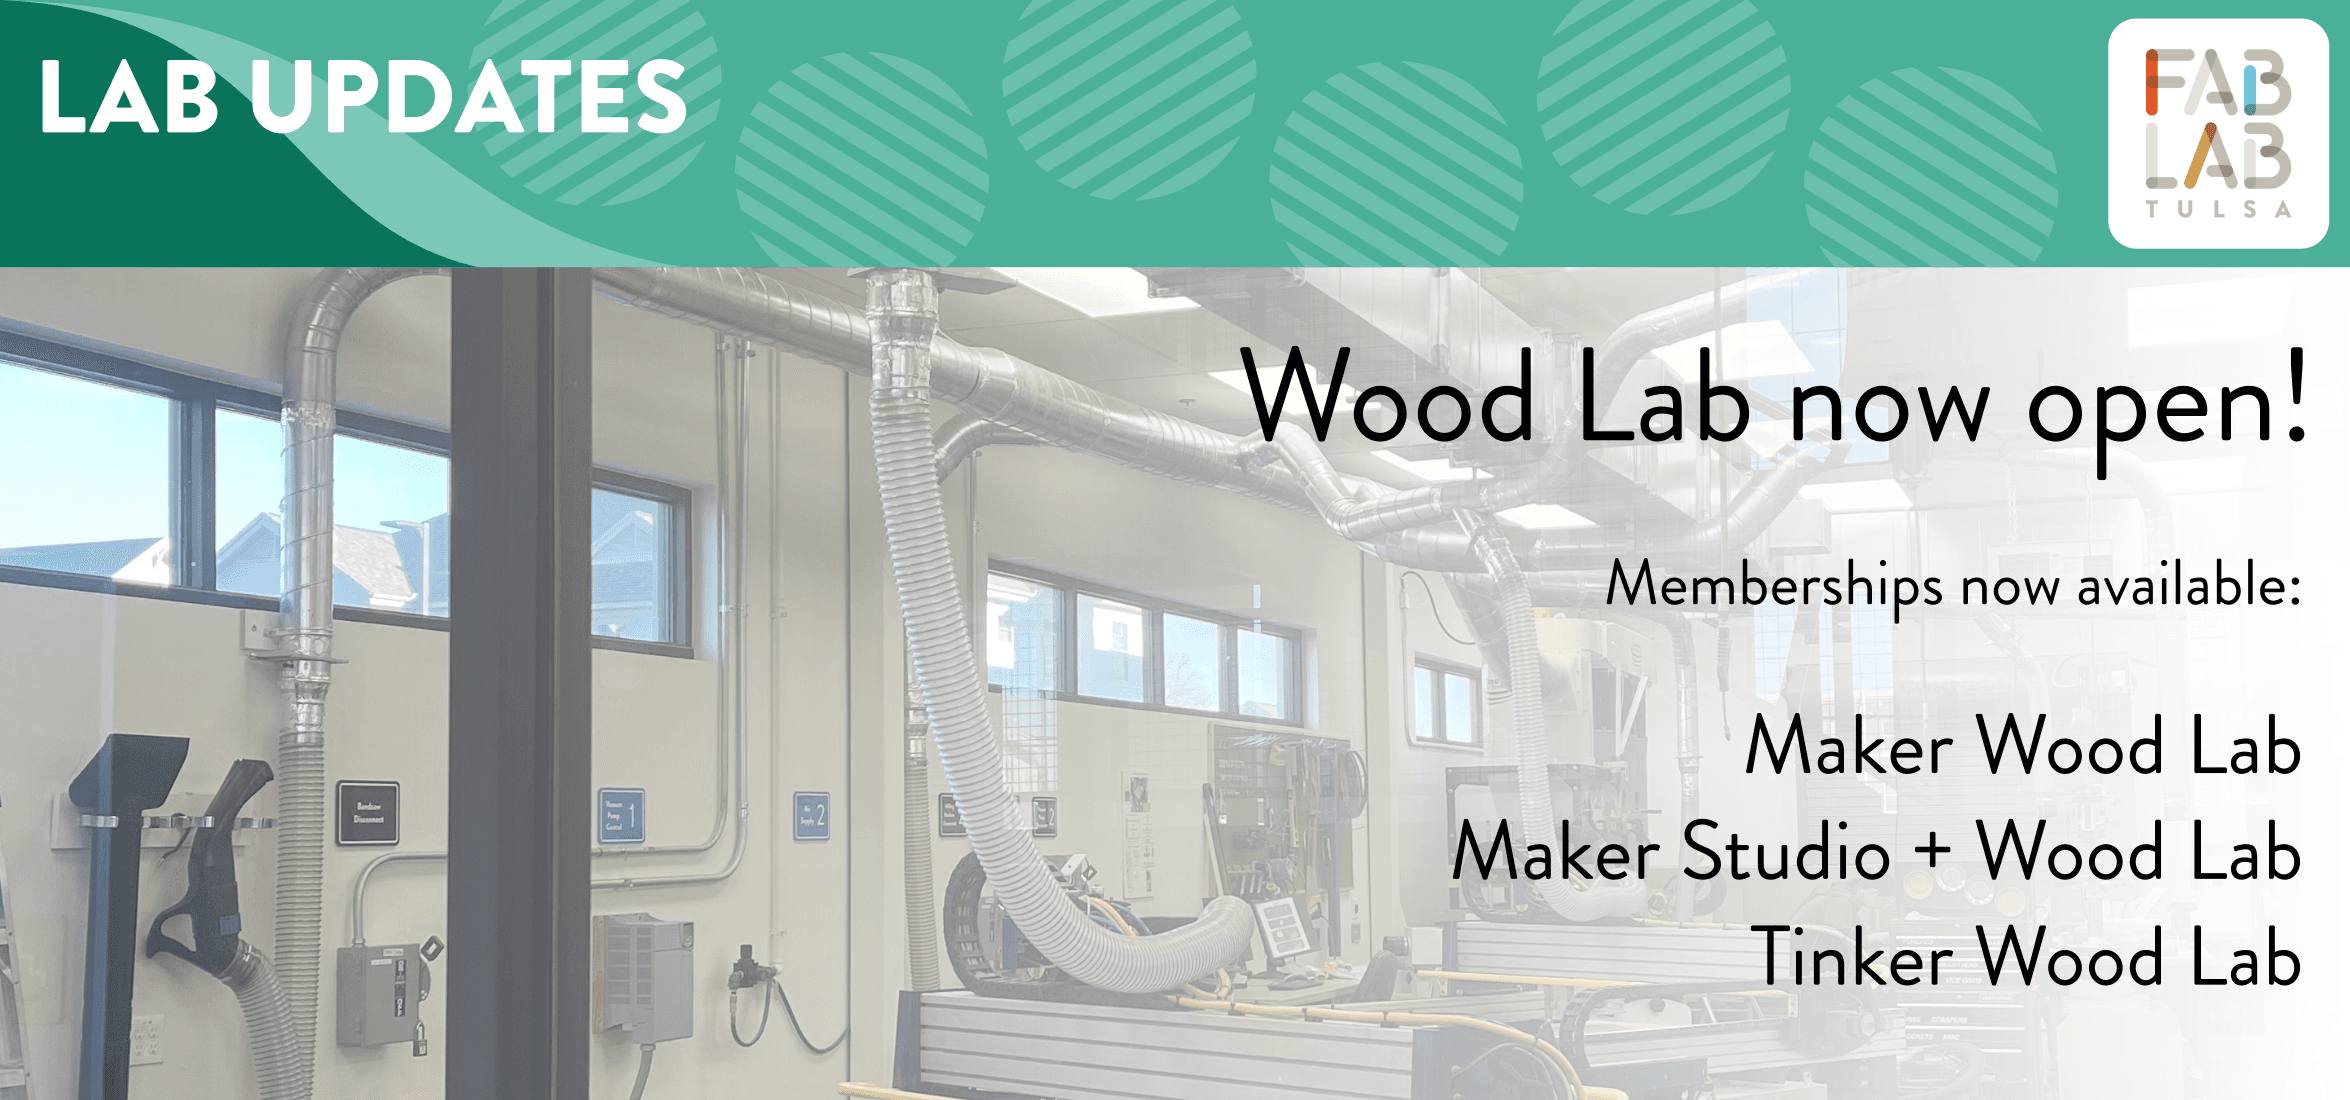 Wood Lab now open!